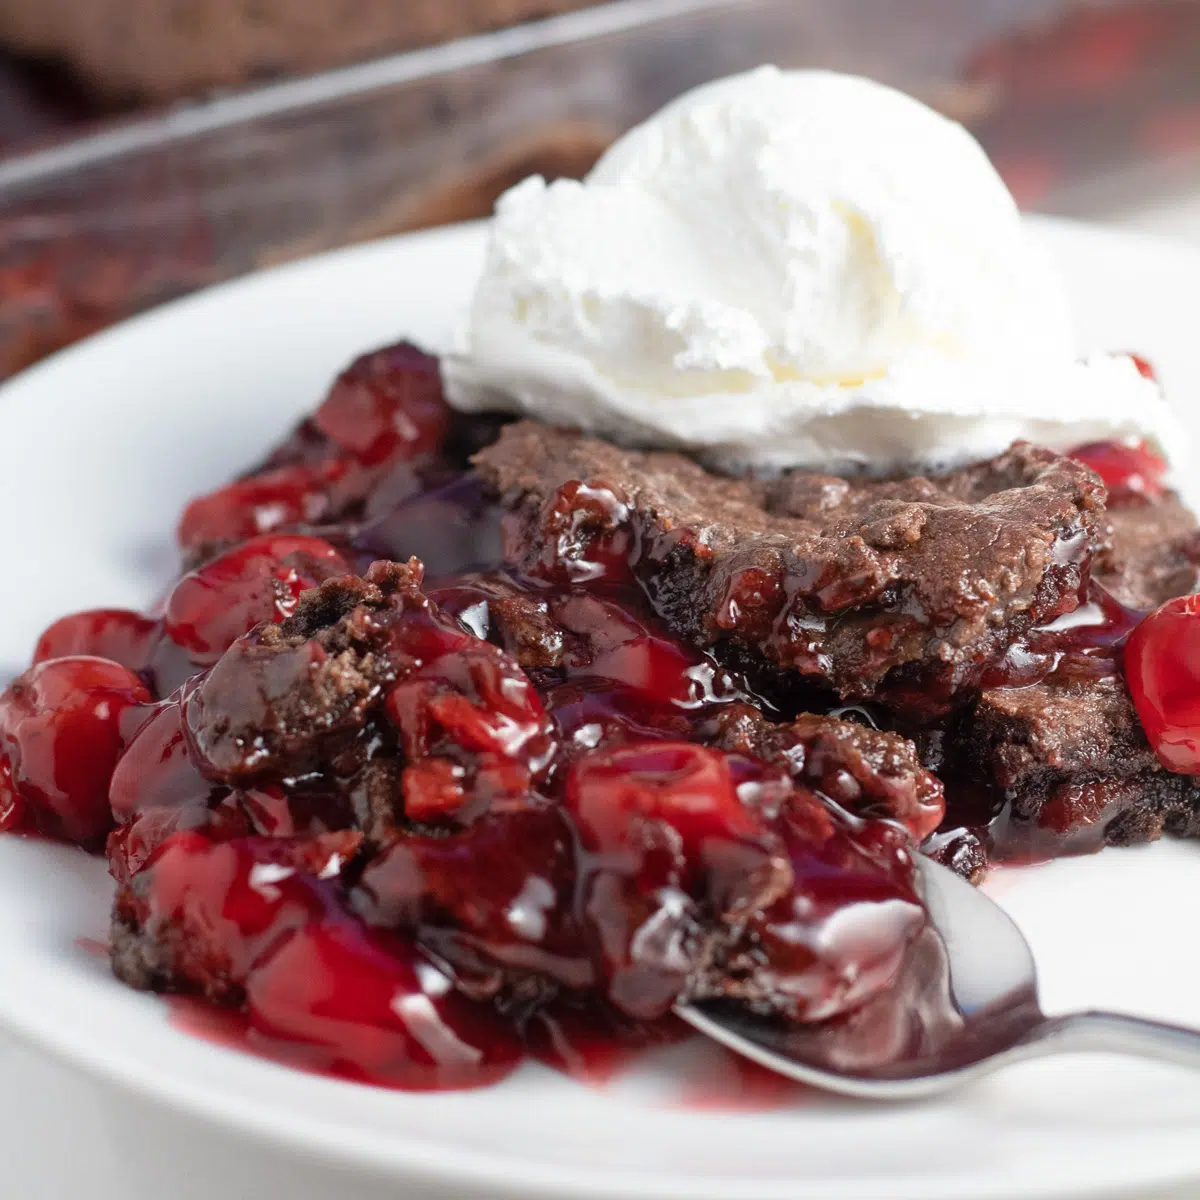 Chocolate cherry dump cake served with whipped cream on top and a spoonful in front.